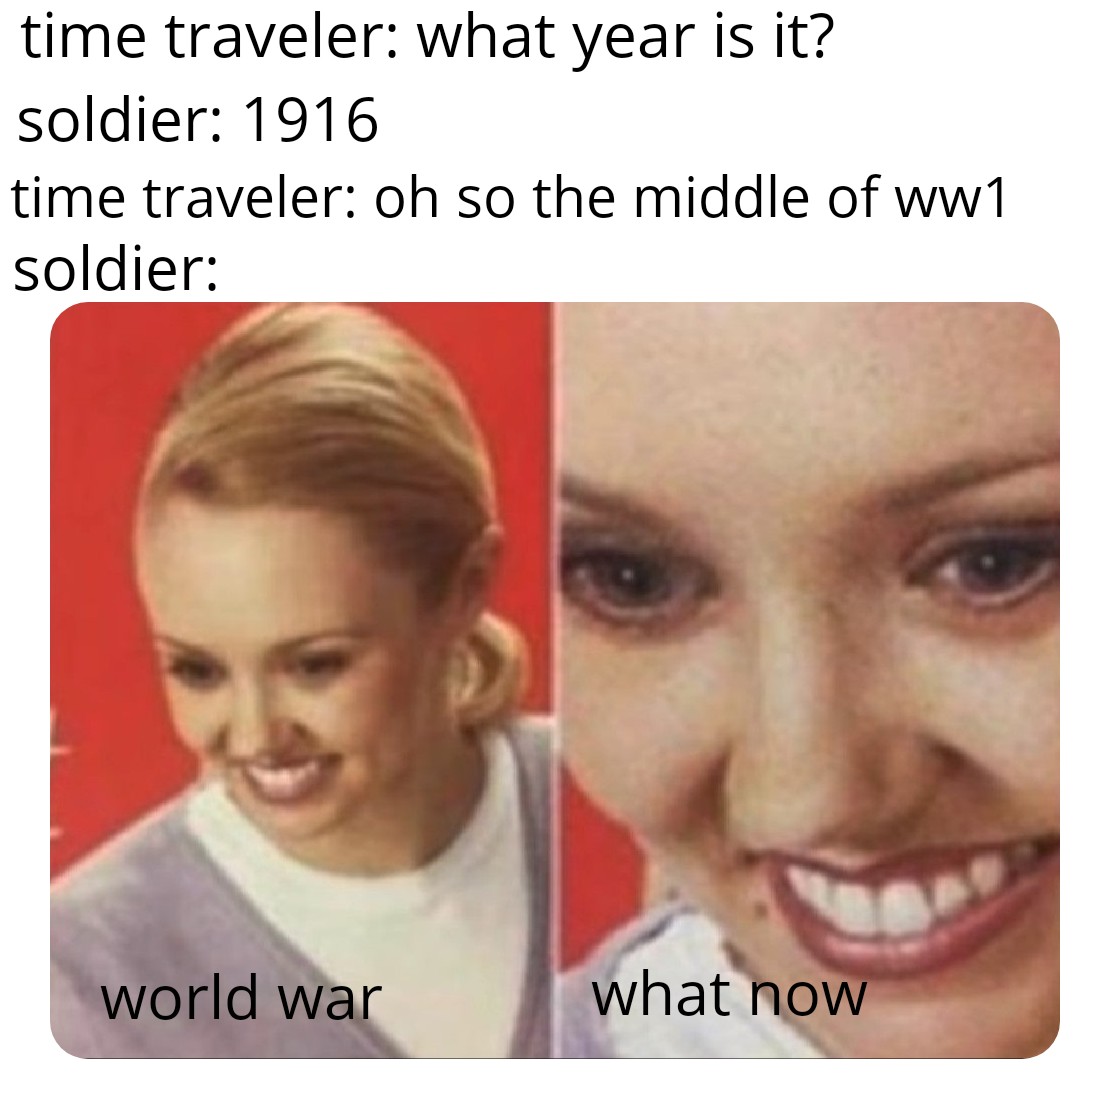 no stain no murder meme - time traveler what year is it? soldier 1916 time traveler oh so the middle of ww1 soldier world war what now